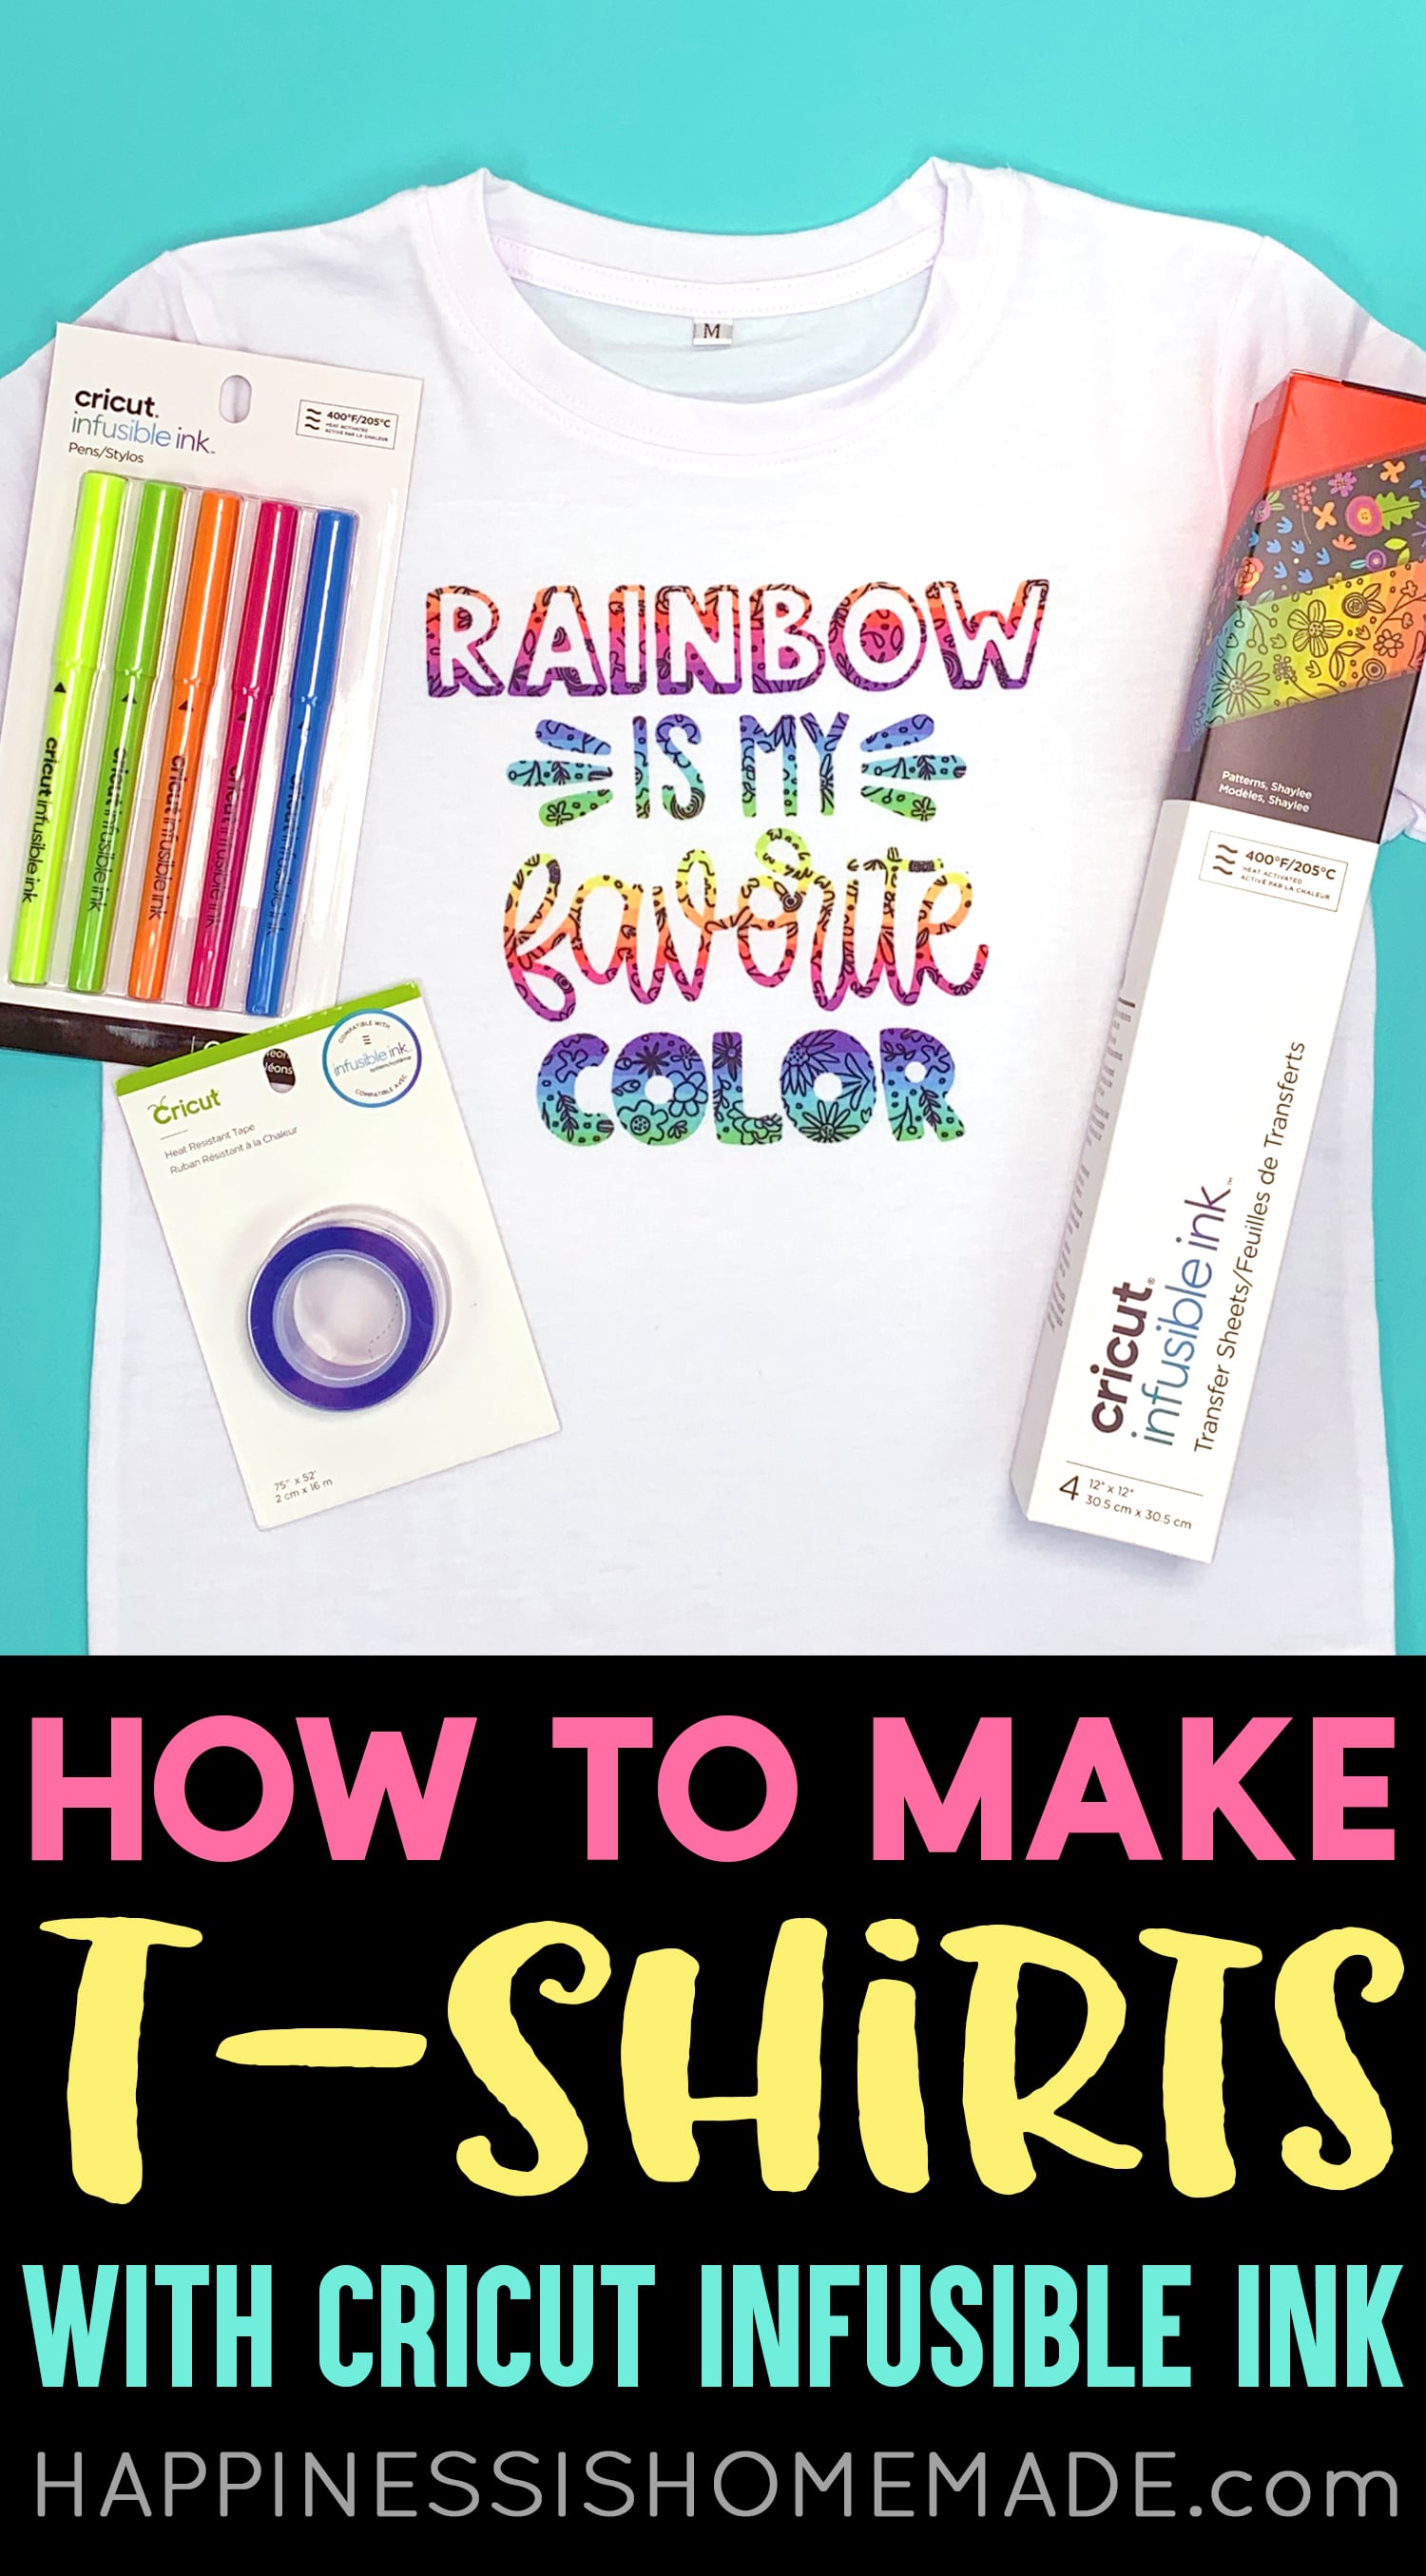 how to make t shirts with infusible ink